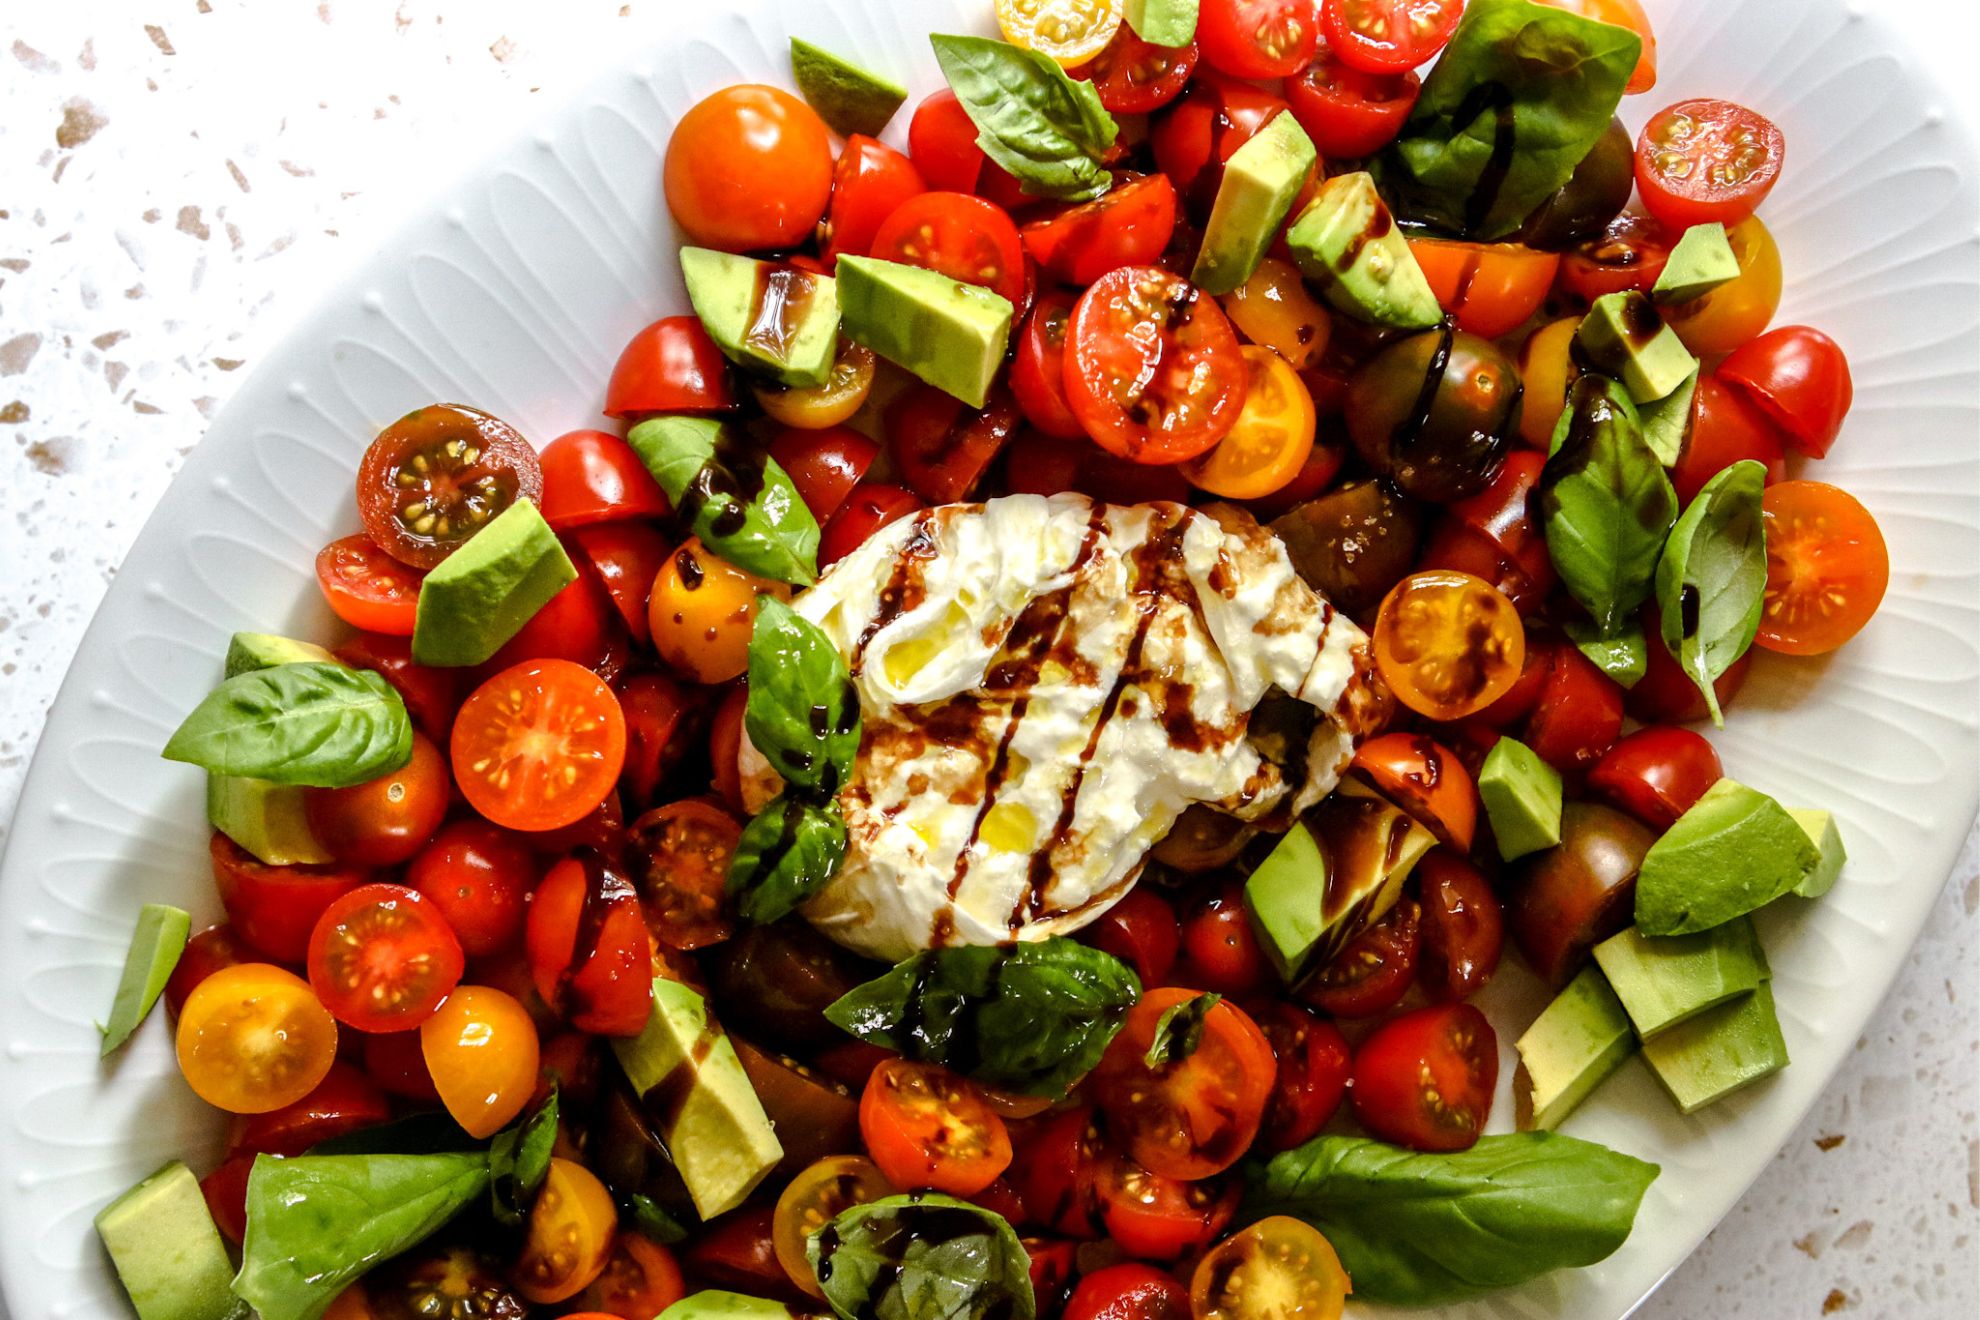 This is an overhead horizontal image of a large white oval plate on a light terrazzo surface. One the plate are small cherry tomatoes cut in half with chunks of avocado scattered around and a ball of burrata pulled apart in the center. Basil leaves are scattered on top of the caprese salad and everything is drizzled with olive oil and balsamic vinegar.